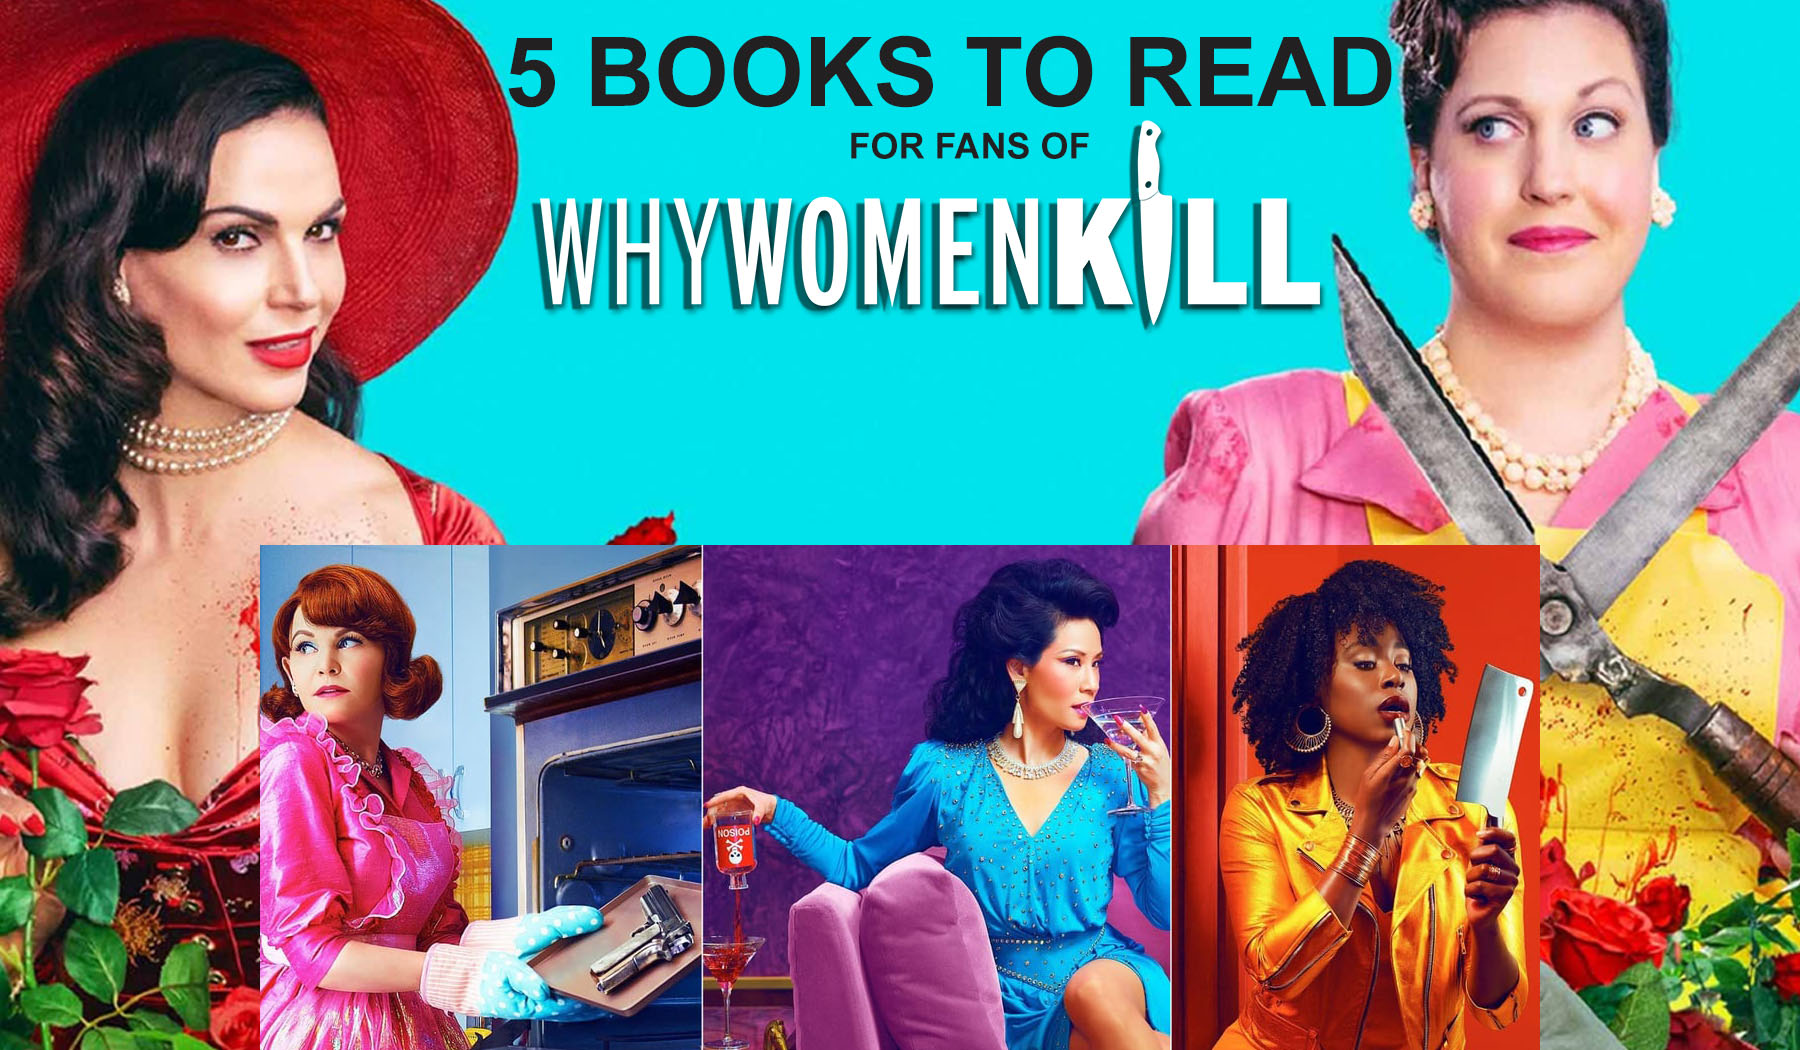 https://worldsbeststory.com/wp-content/uploads/2022/12/books-to-read-for-fans-of-why-women-kill.jpg